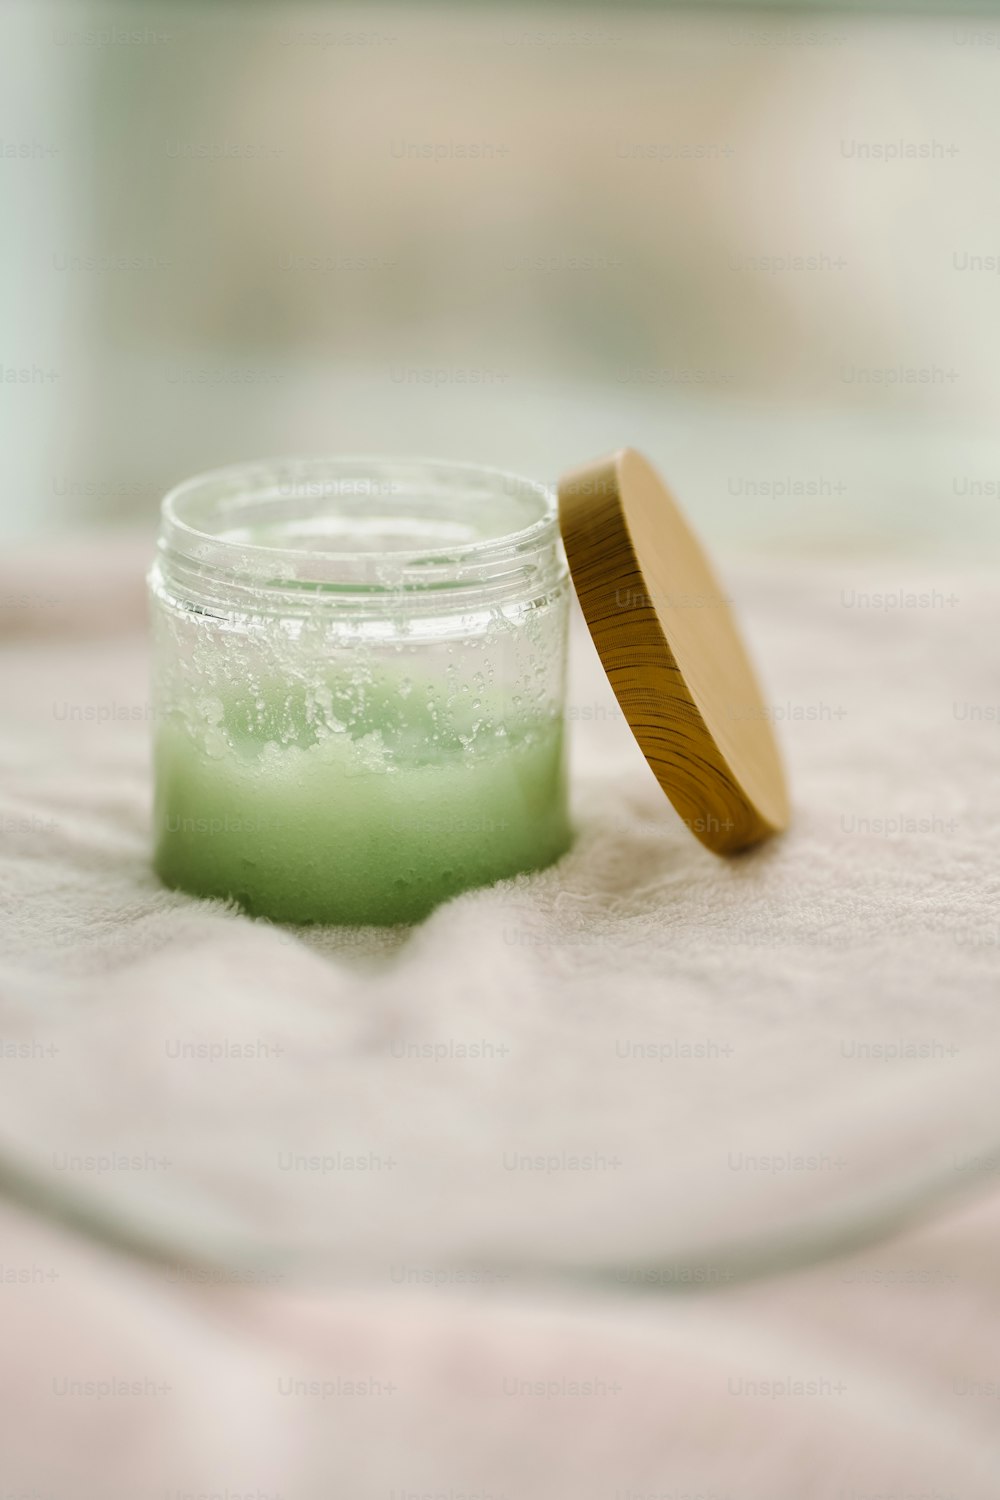 a jar of green liquid with a wooden lid